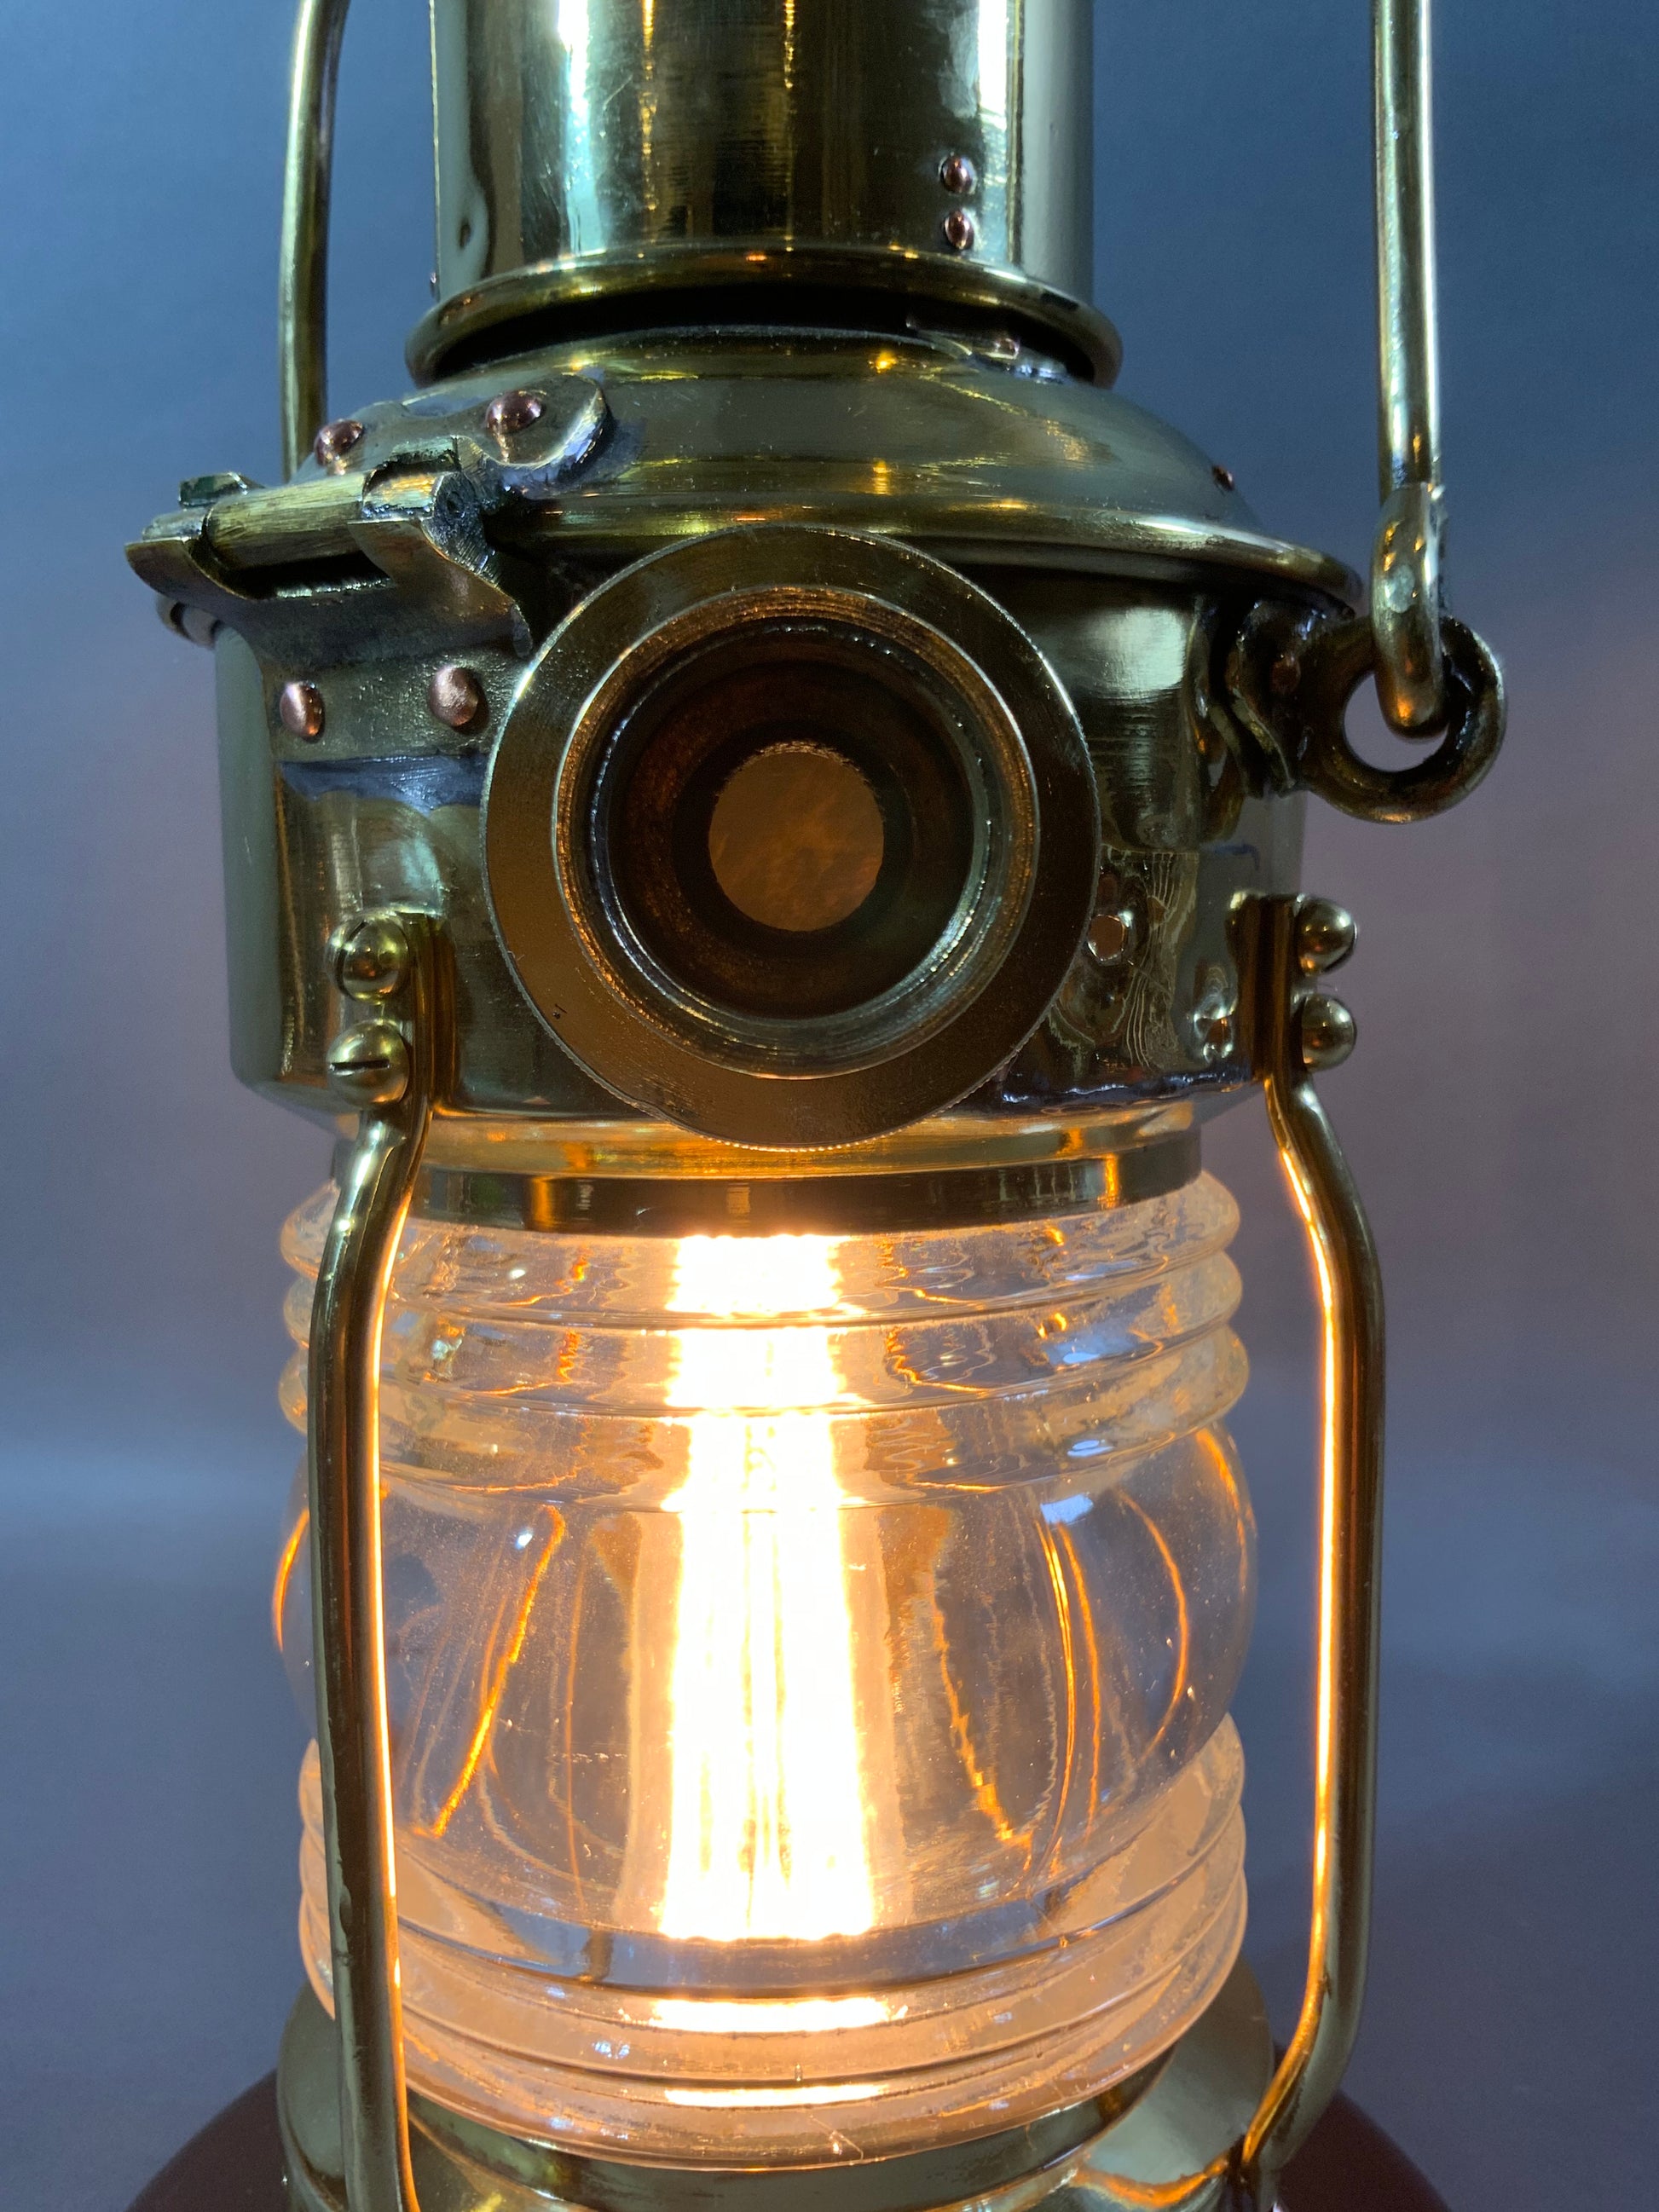 Antique Ships Anchor Lantern by French Maker – Lannan Gallery